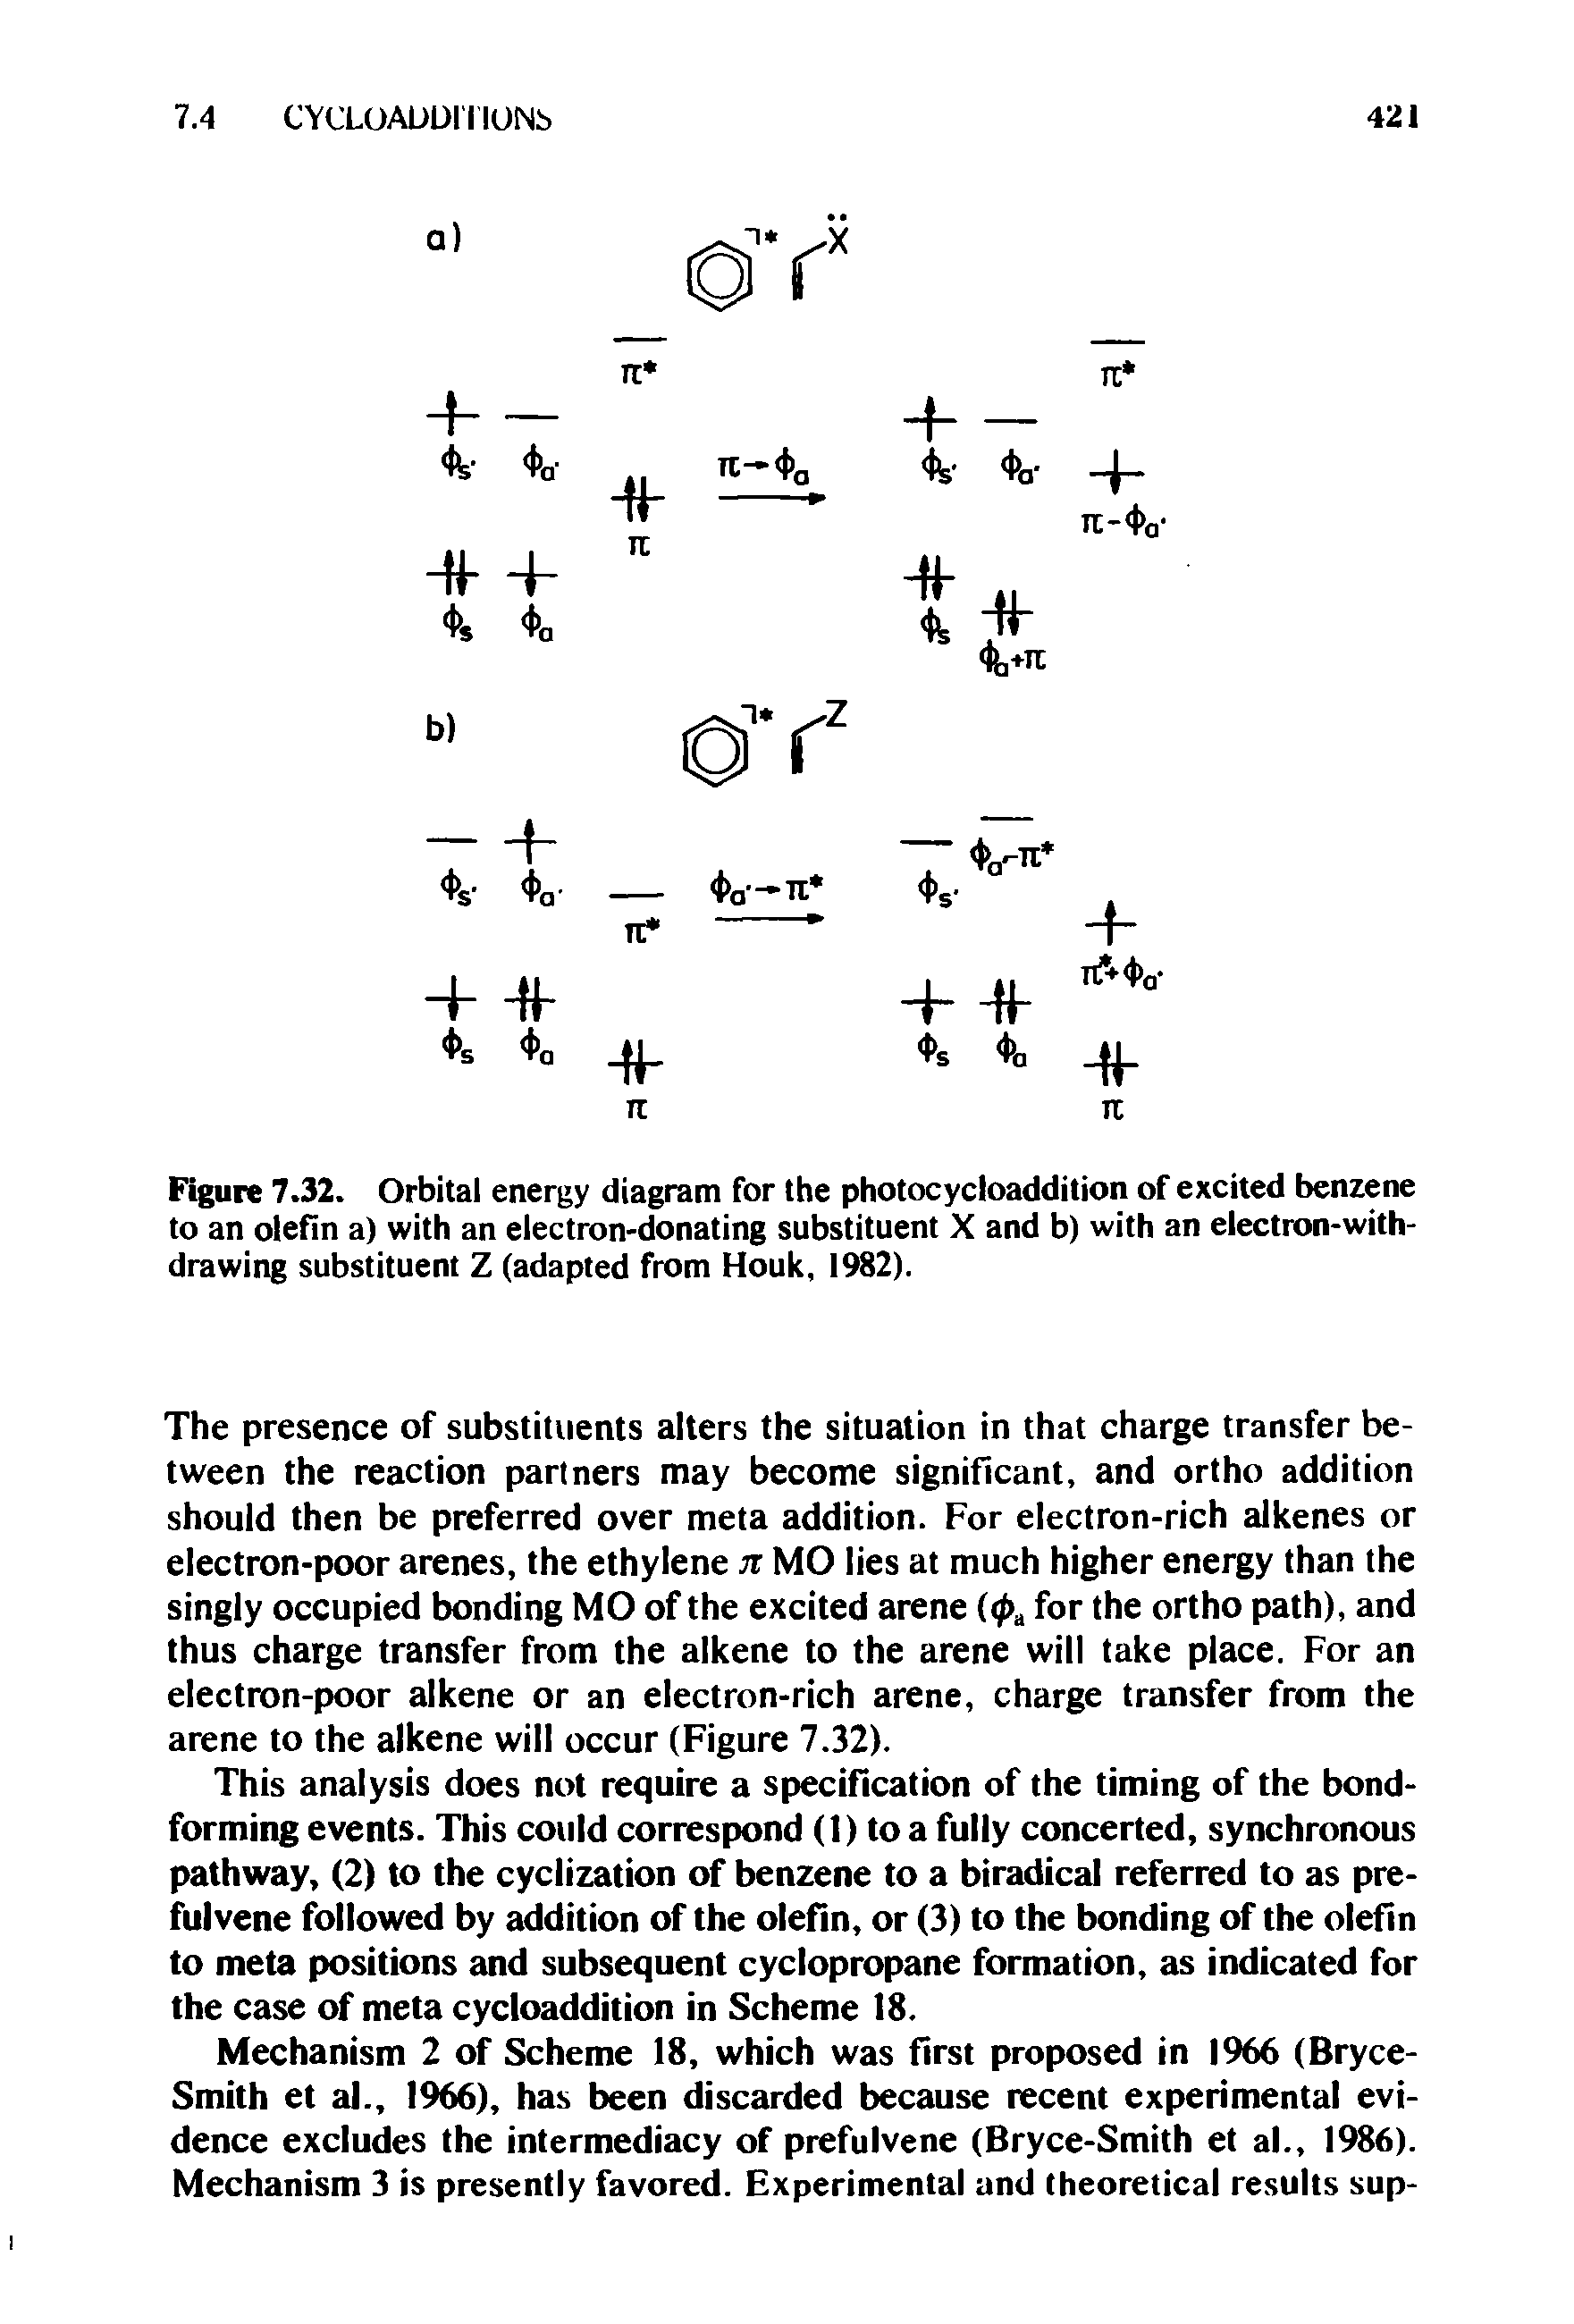 Figure 7.32. Orbital energy diagram for the photocycloaddition of excited benzene to an olefin a) with an electron-donating substituent X and b) with an electron-withdrawing substituent Z (adapted from Houk, 1982).